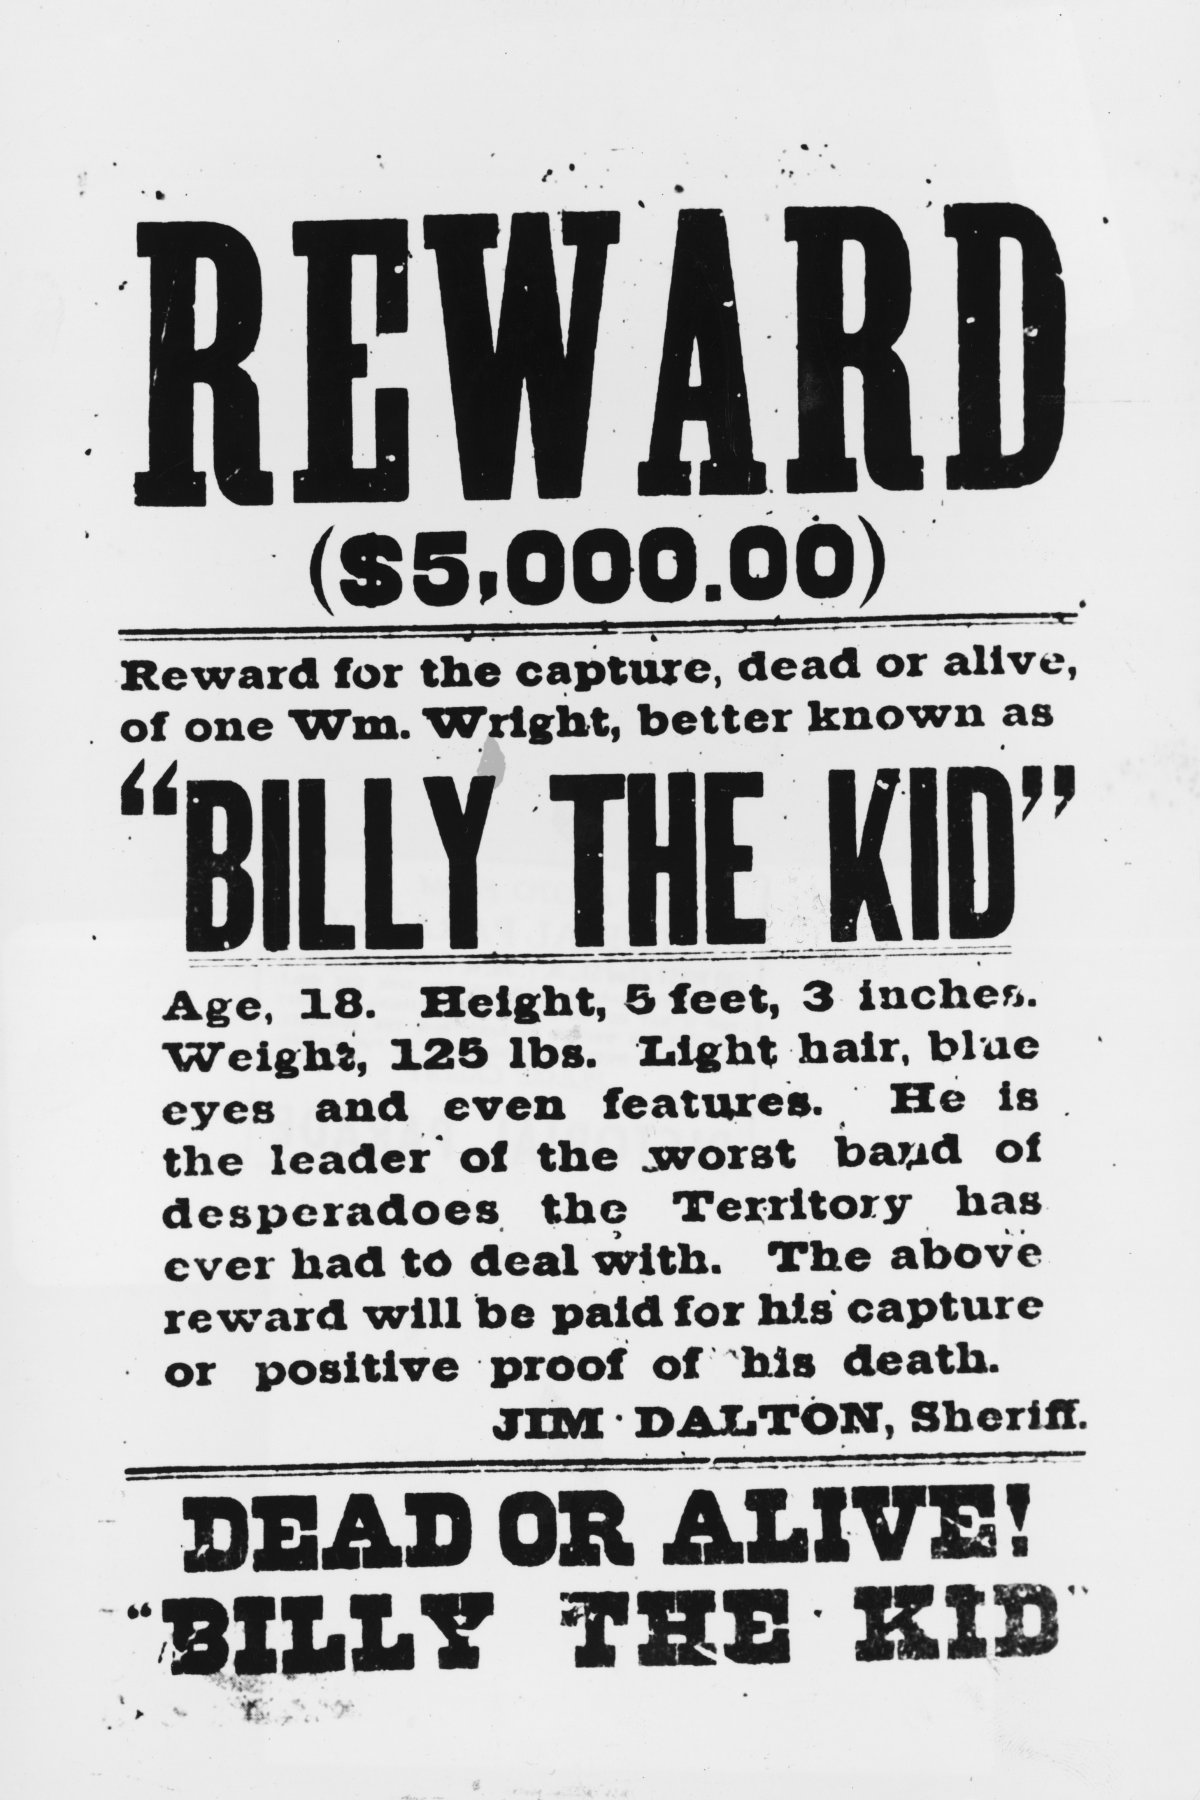 A wanted poster for Billy the Kid.